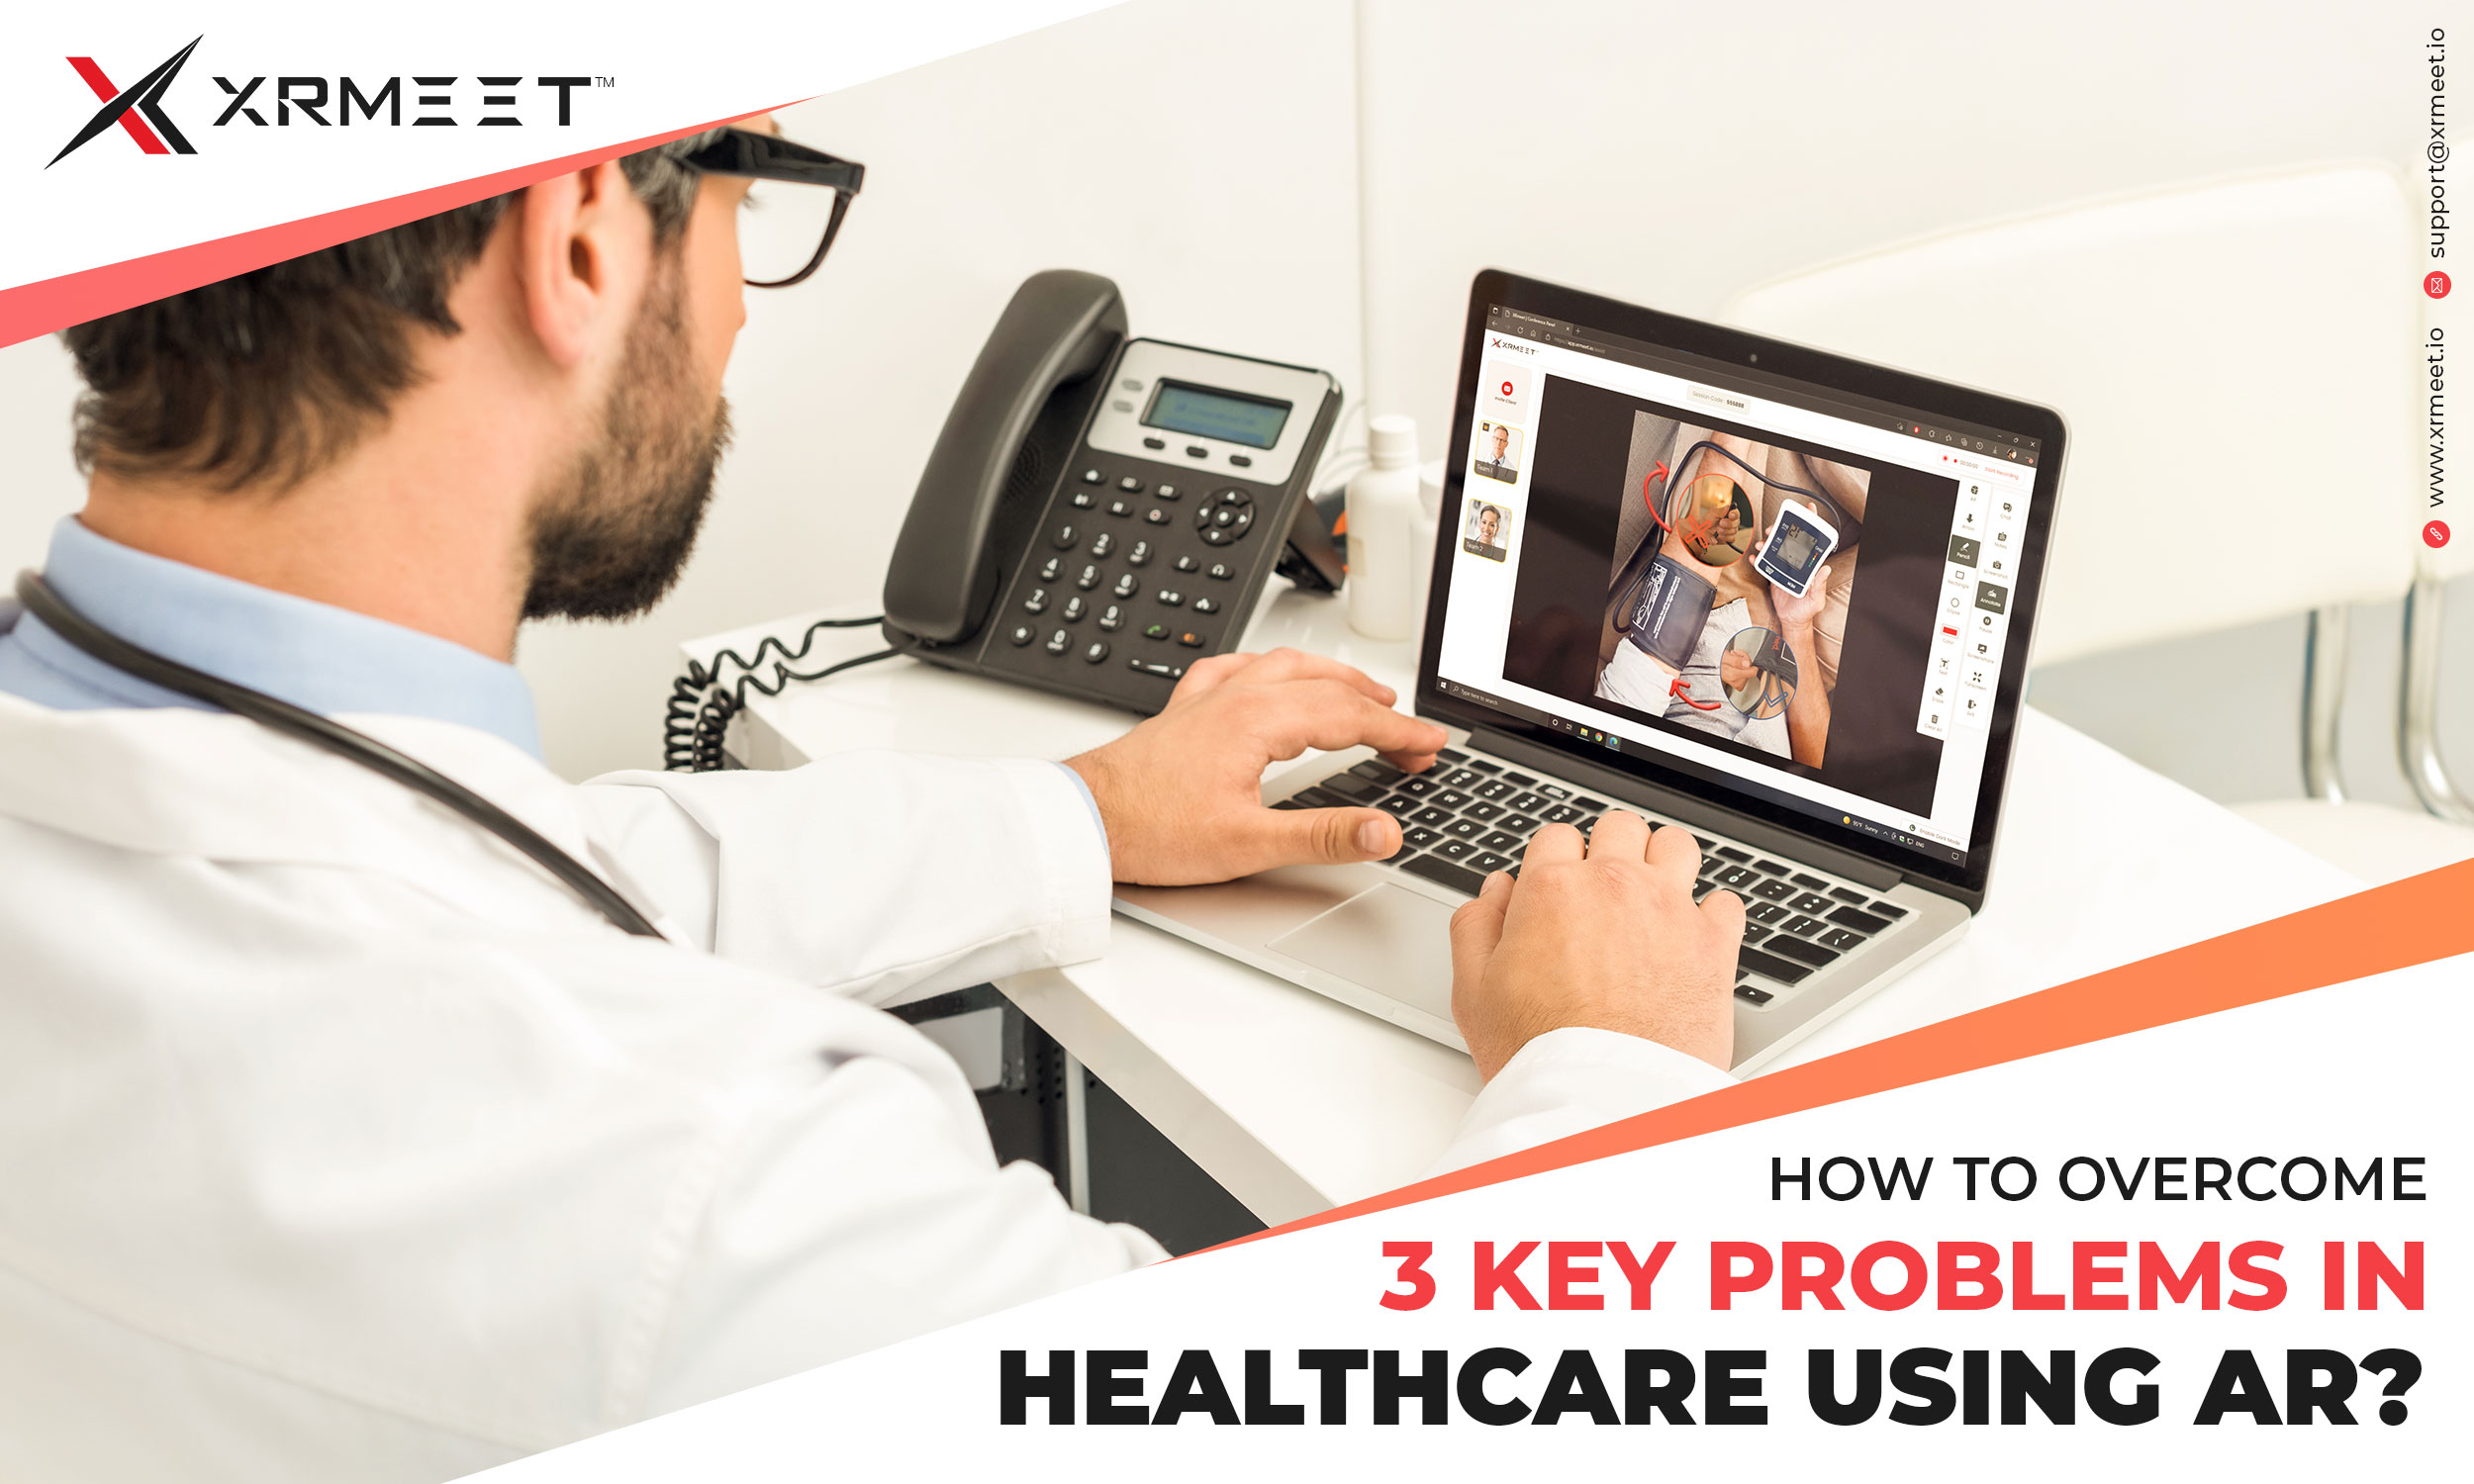 Augmented reality in healthcare sector
                           